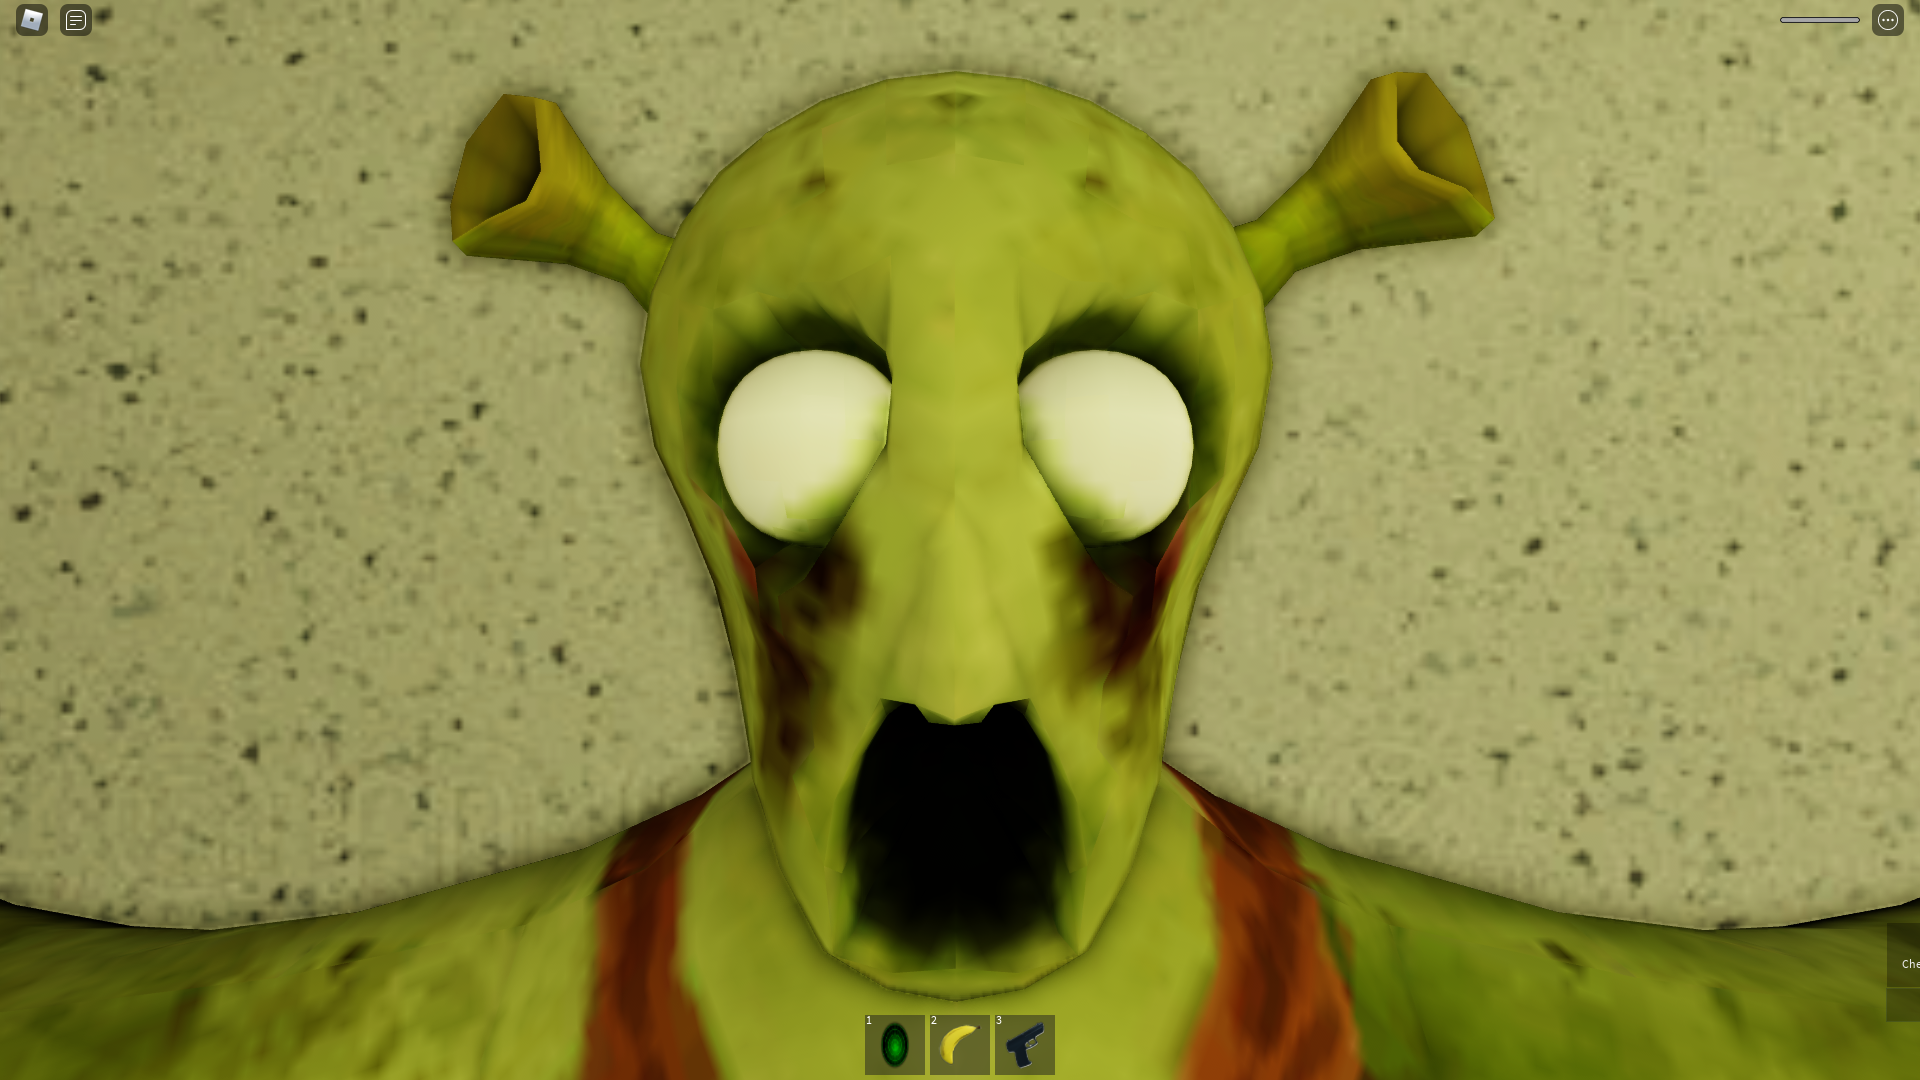 Roblox Shrek In The Backrooms New Level 12 The Musky Crab Entity Jumpscare  Scene New Update 